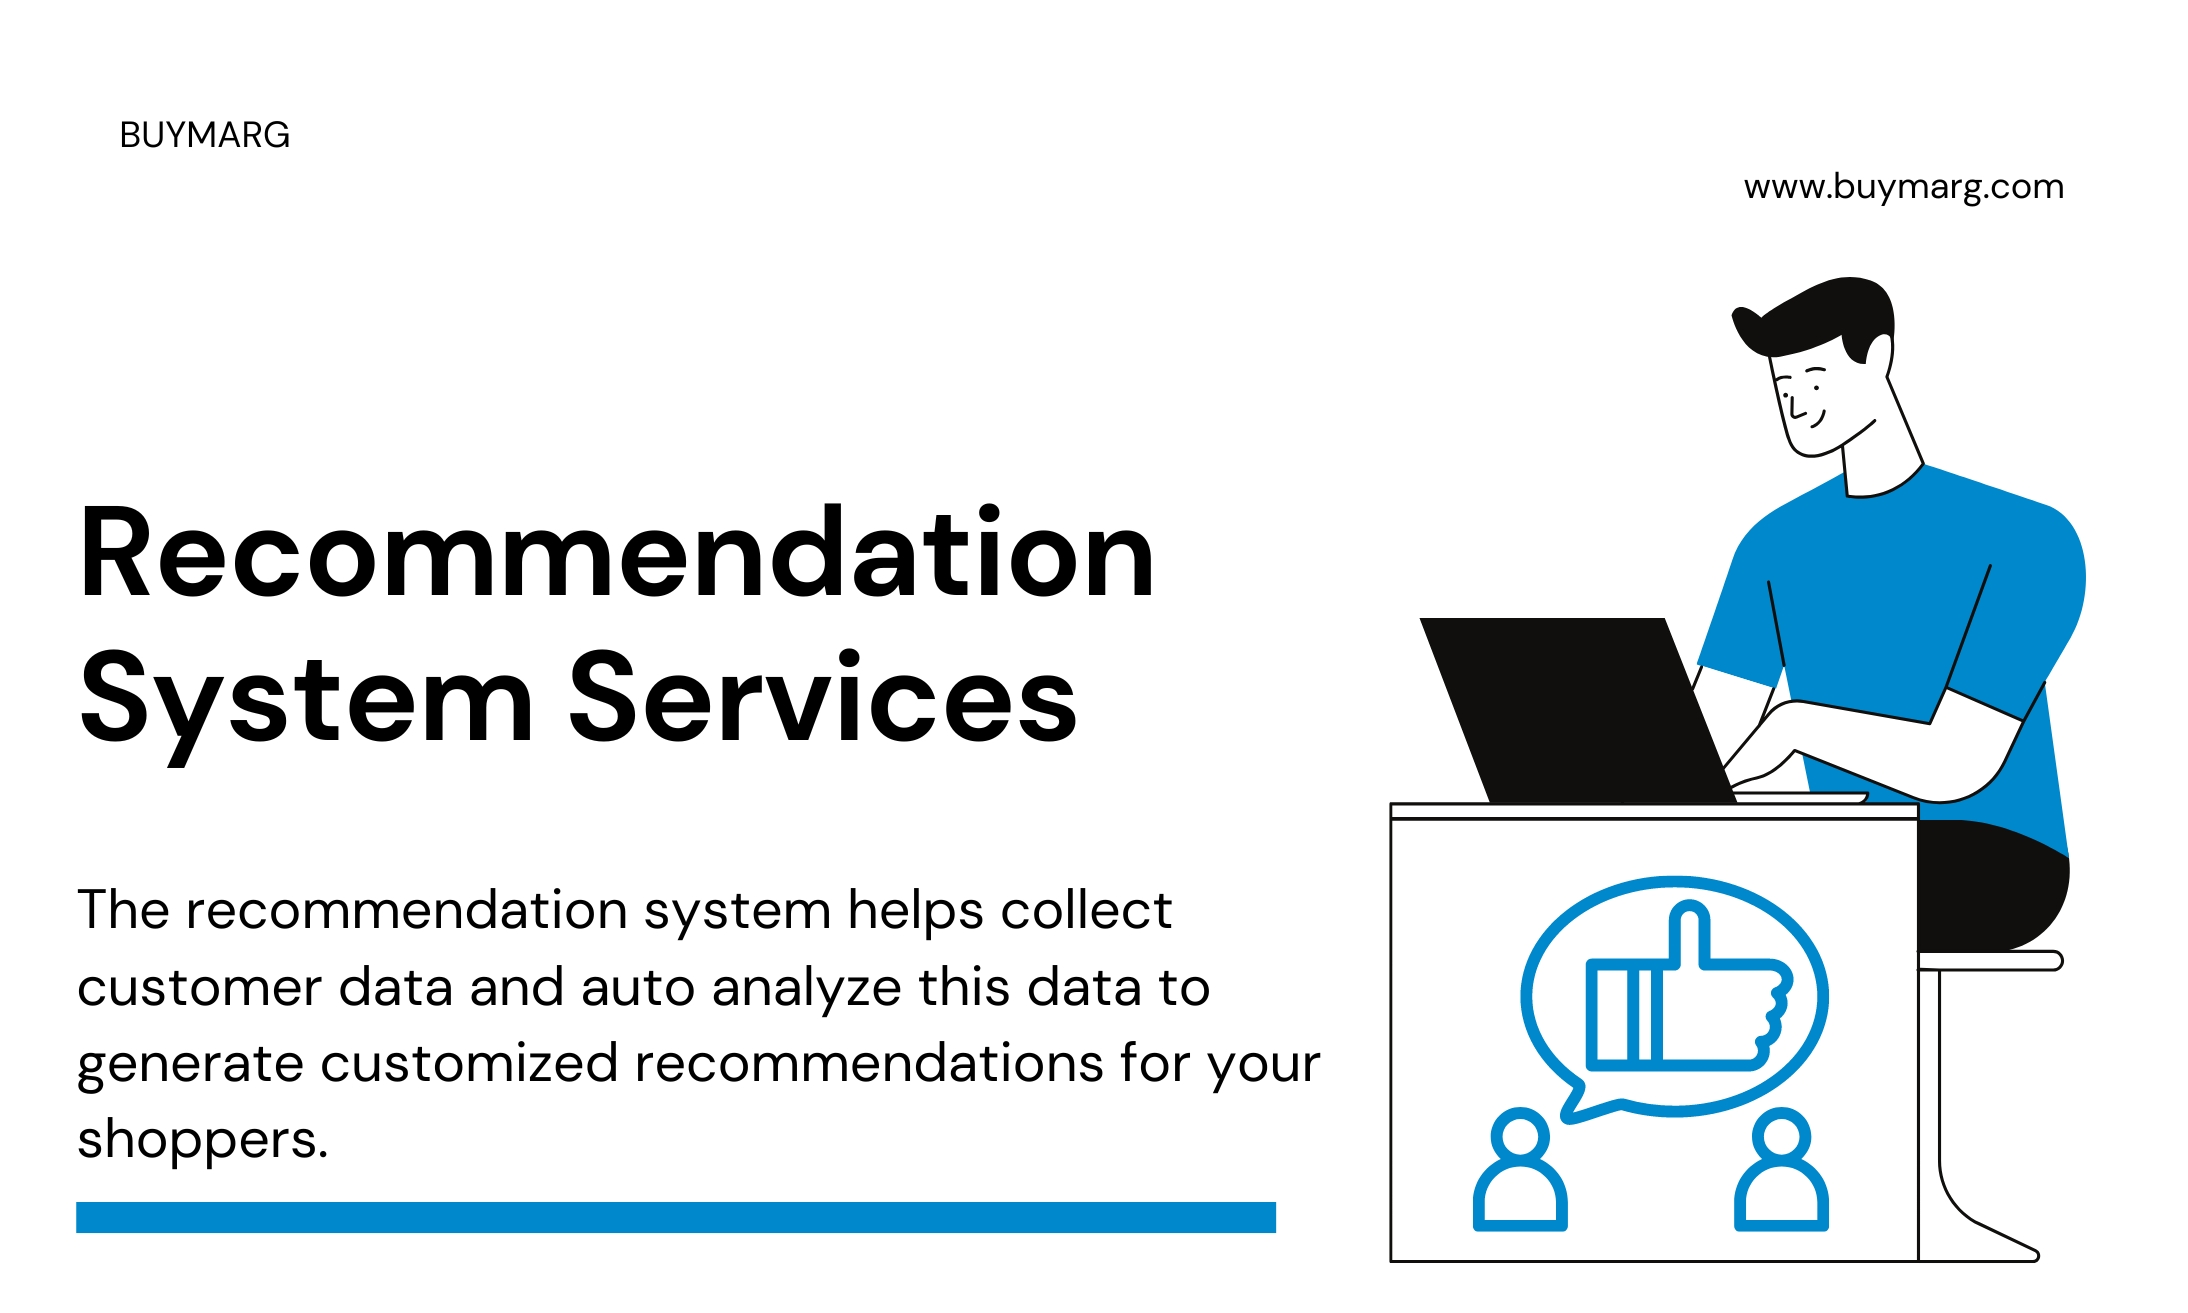 Recommendation System Services